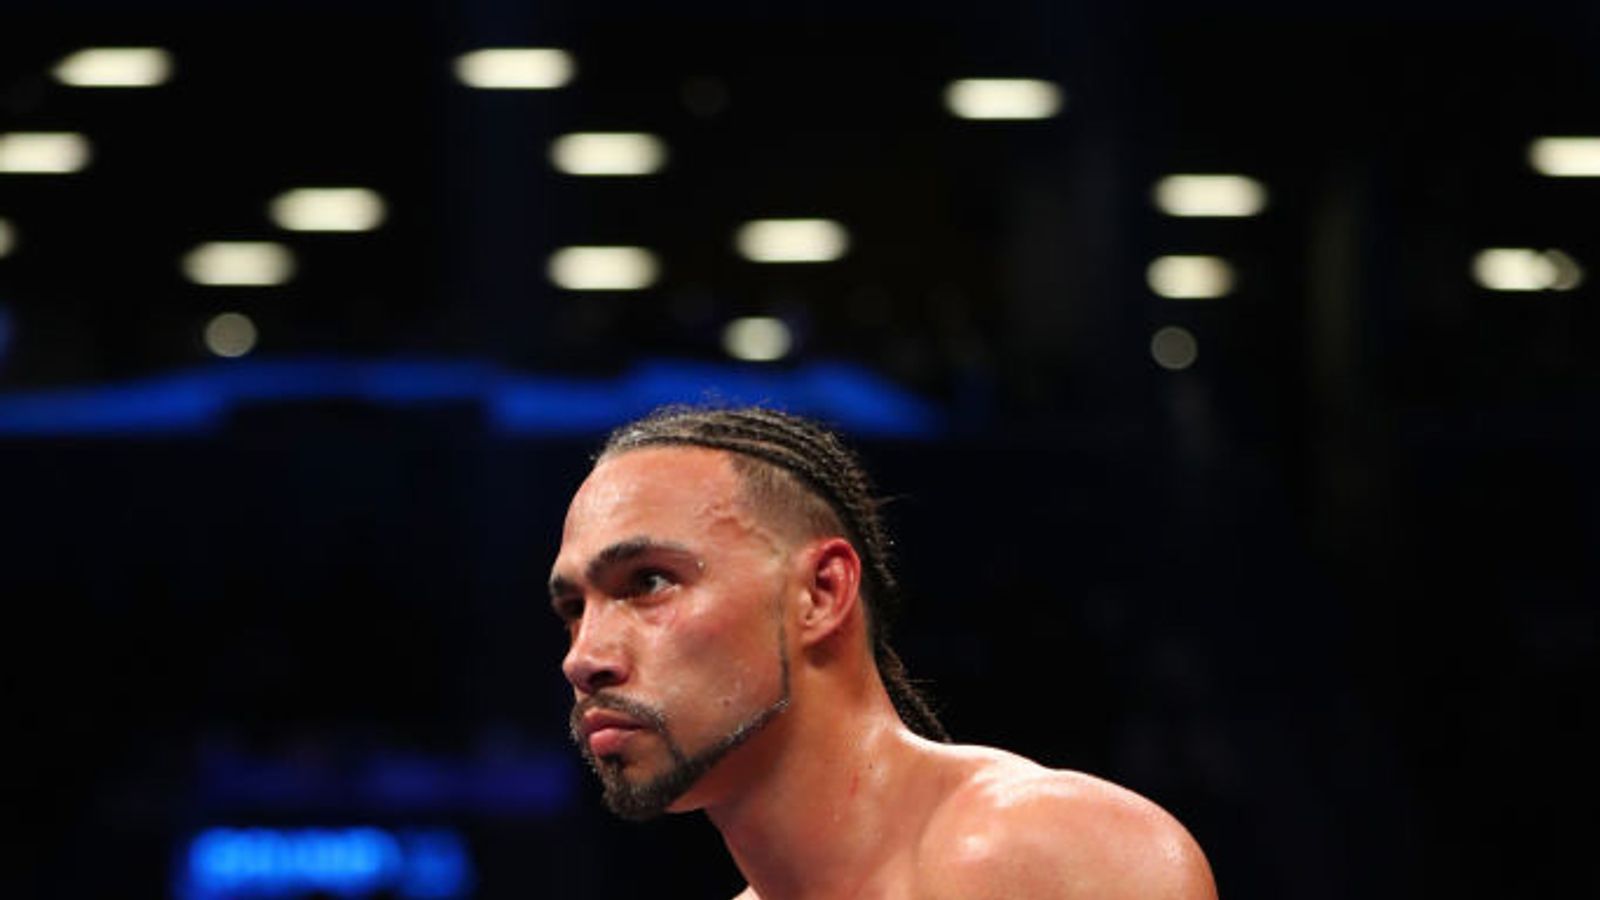 Keith Thurman relinquishes WBC welterweight title | Boxing News | Sky Sports